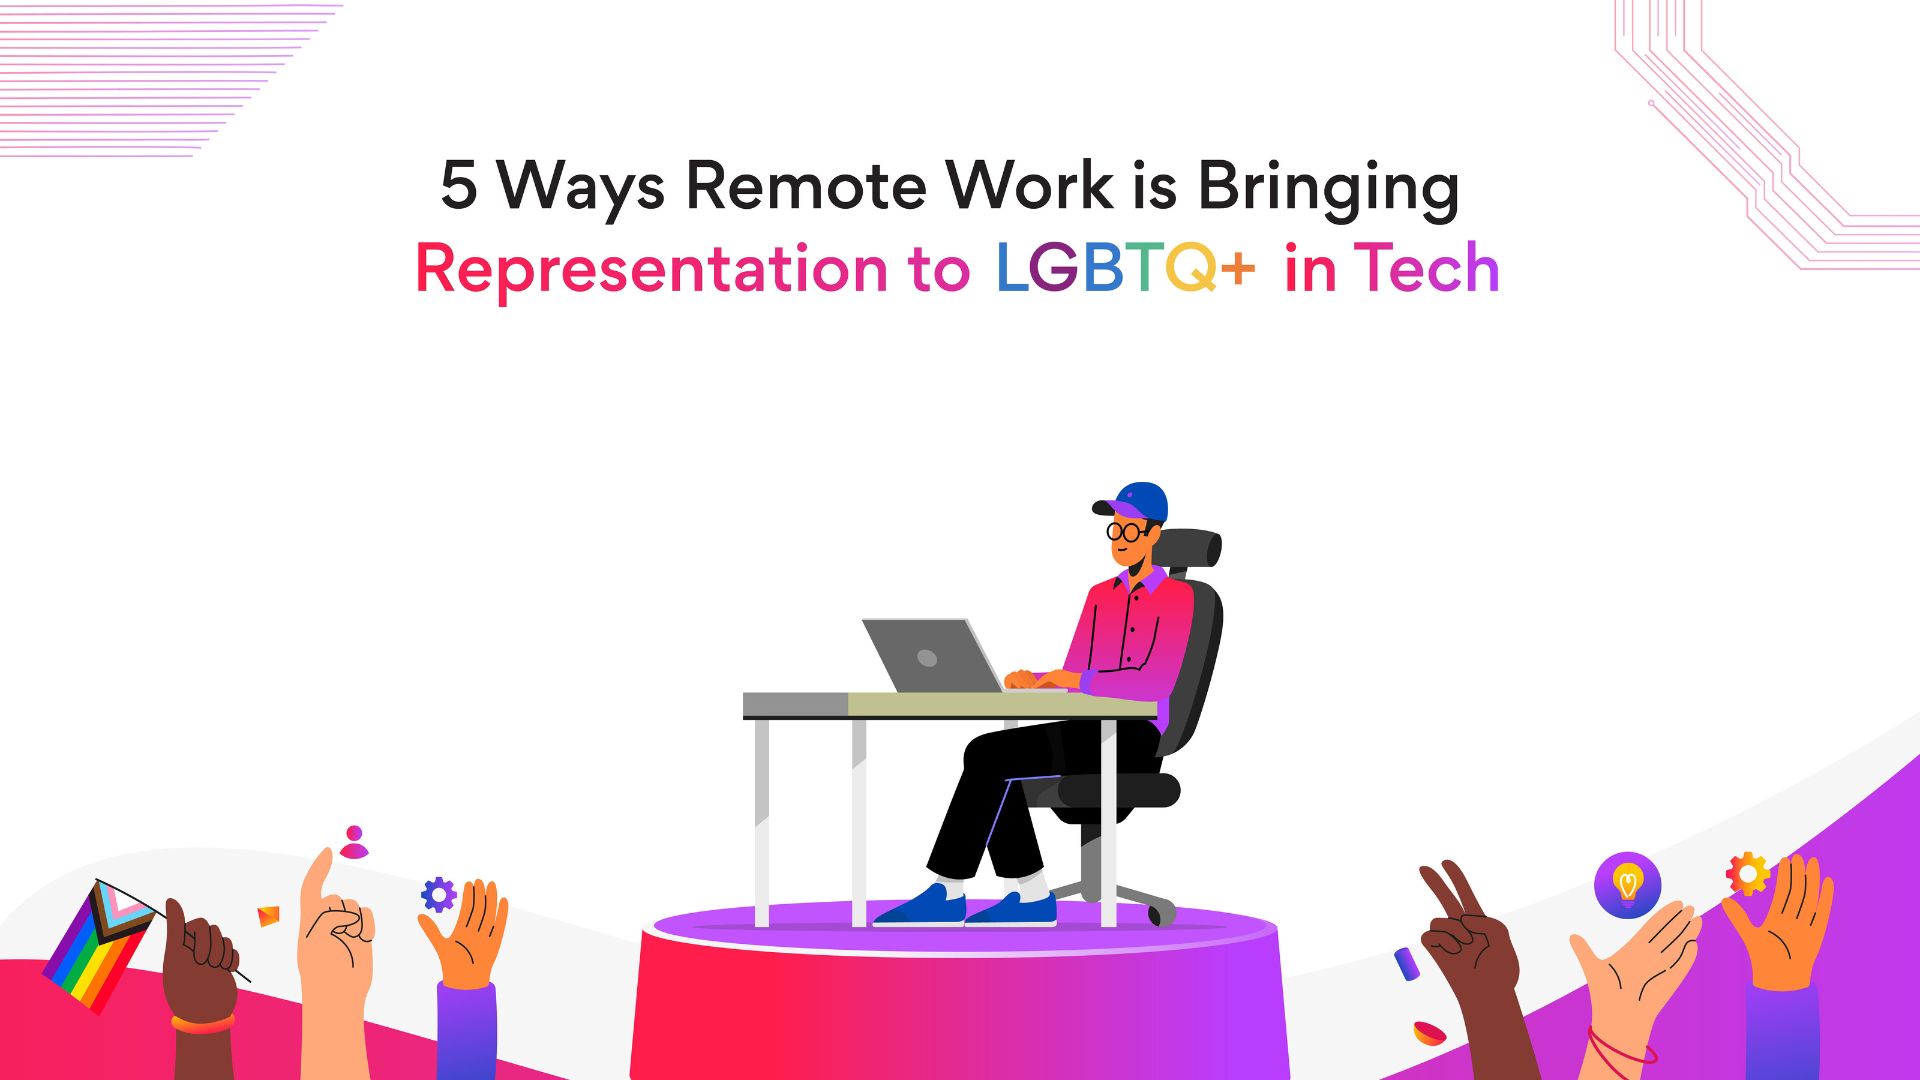 5 Ways Remote Work is Helping Represent LGBTQ+ in Tech